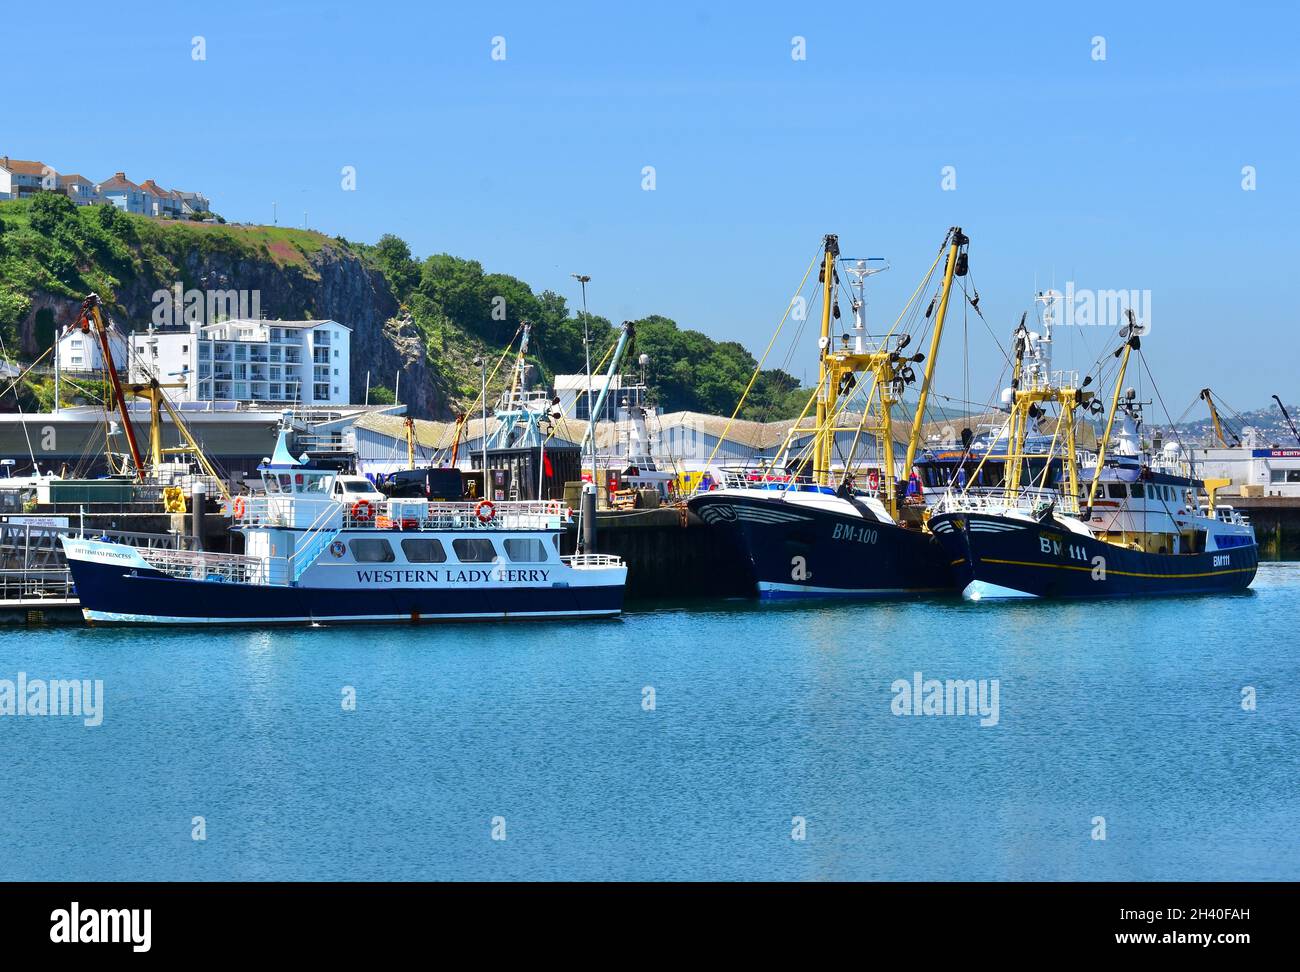 The Western Lady ferry boat provides a holiday service between Brixham and Torquay. Trawler fishing boats moored at the same quay. Stock Photo